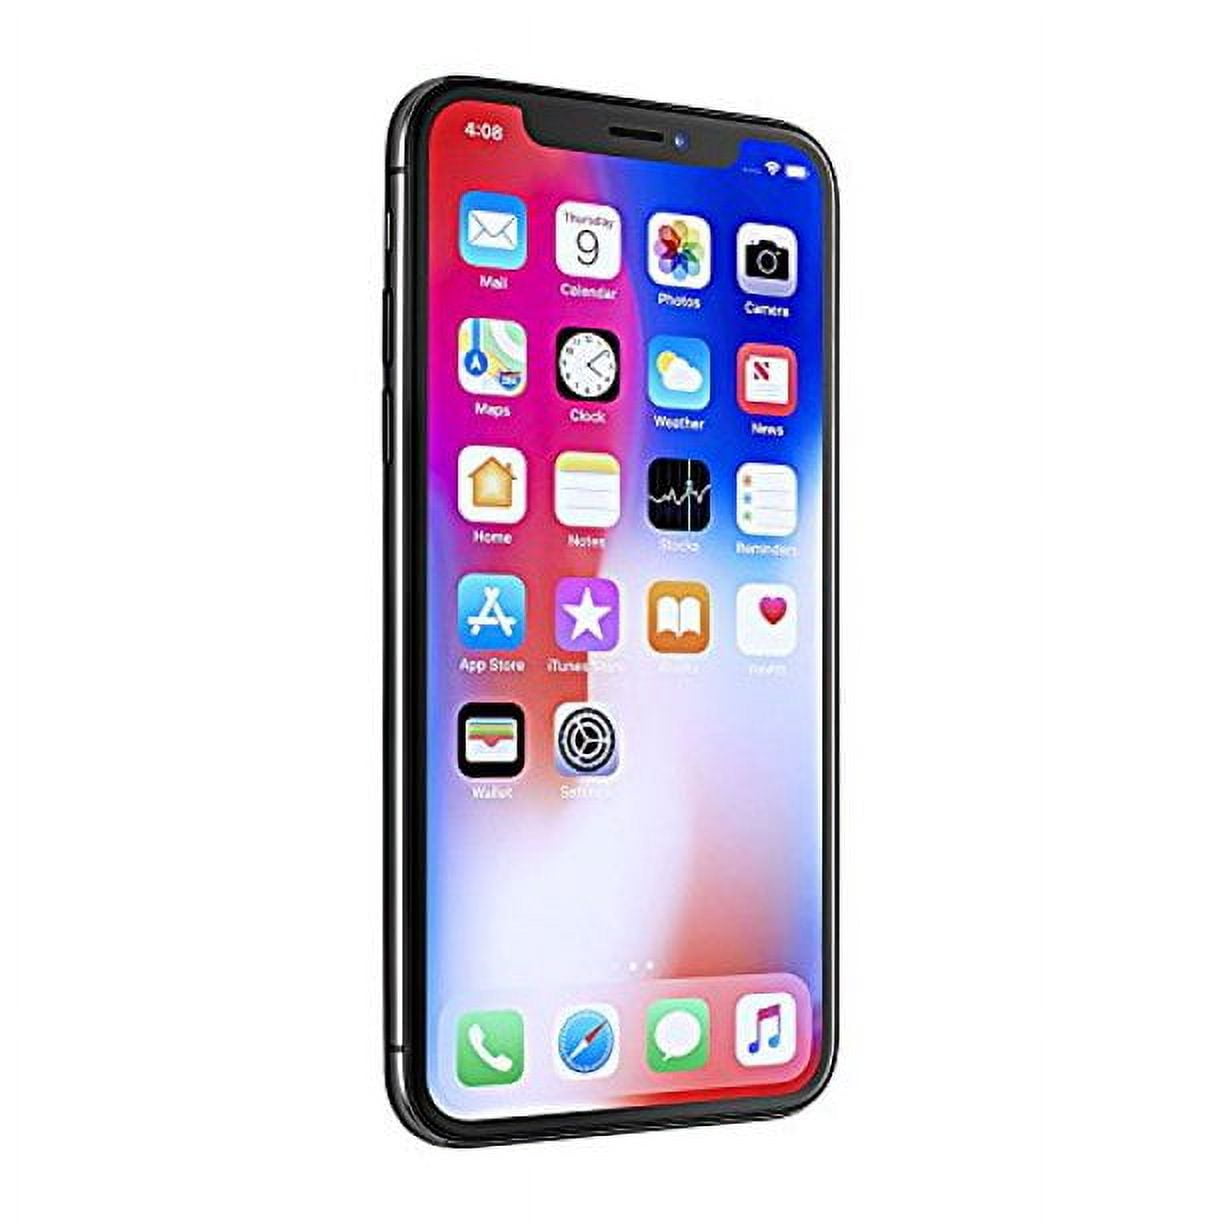 Restored Apple iPhone X 64GB Space Gray GSM Unlocked (AT&T + T-Mobile)  Smartphone (Refurbished)